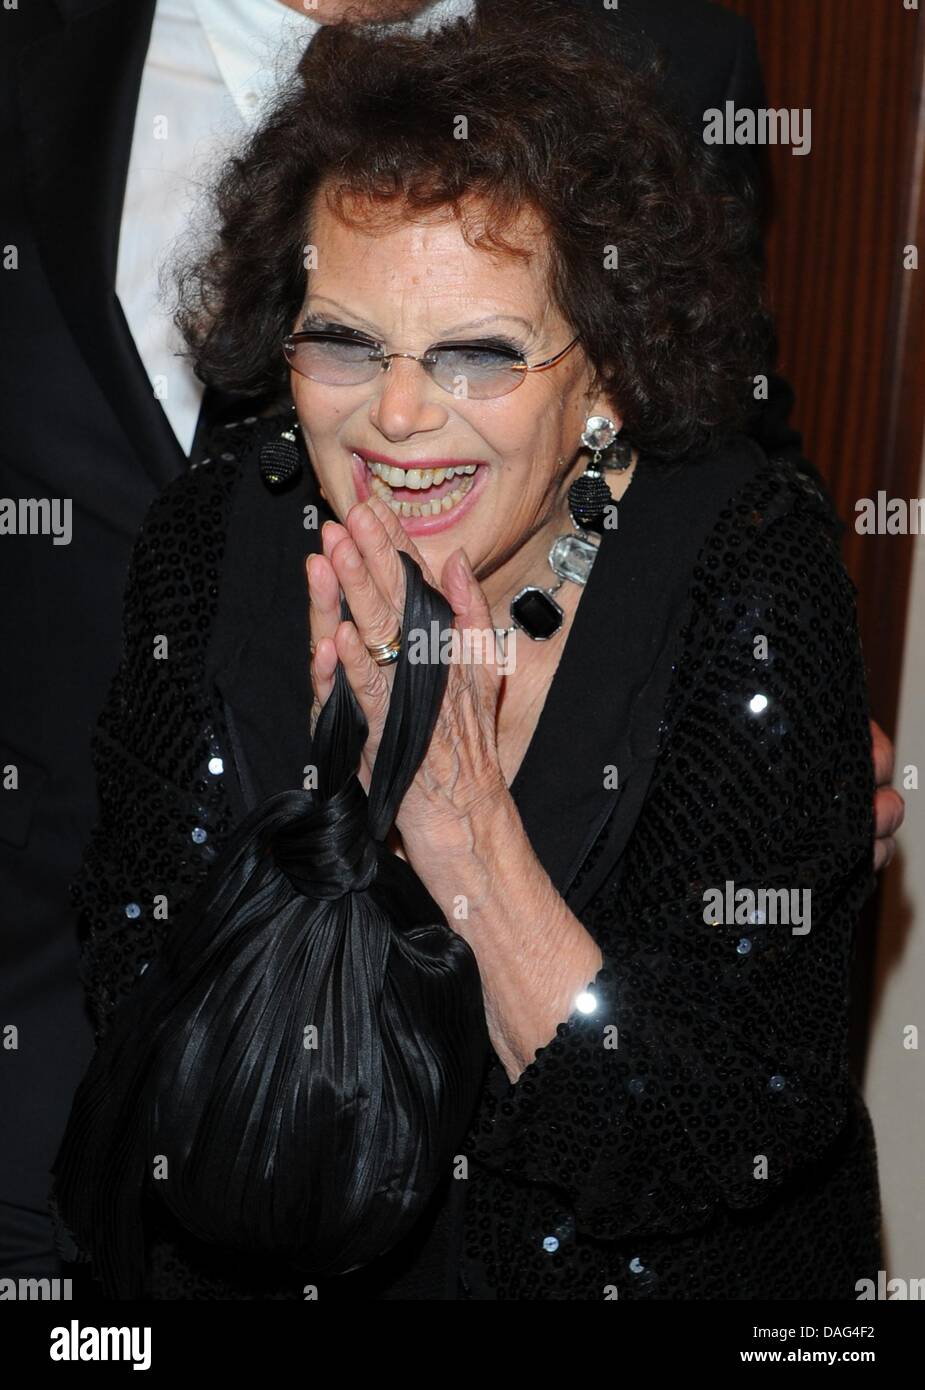 The picture shows the Italian actress Claudia Cardinale at a film screening and reception at the Italian Embassy in Berlin, Germany on 17 March 2011. On the occasion of Italy's 150th anniversary the film 'Il Gattopardo' (The Leopard) was shown, in which Cardinale plays the lead. PHOTO: JENS KALAENE Stock Photo